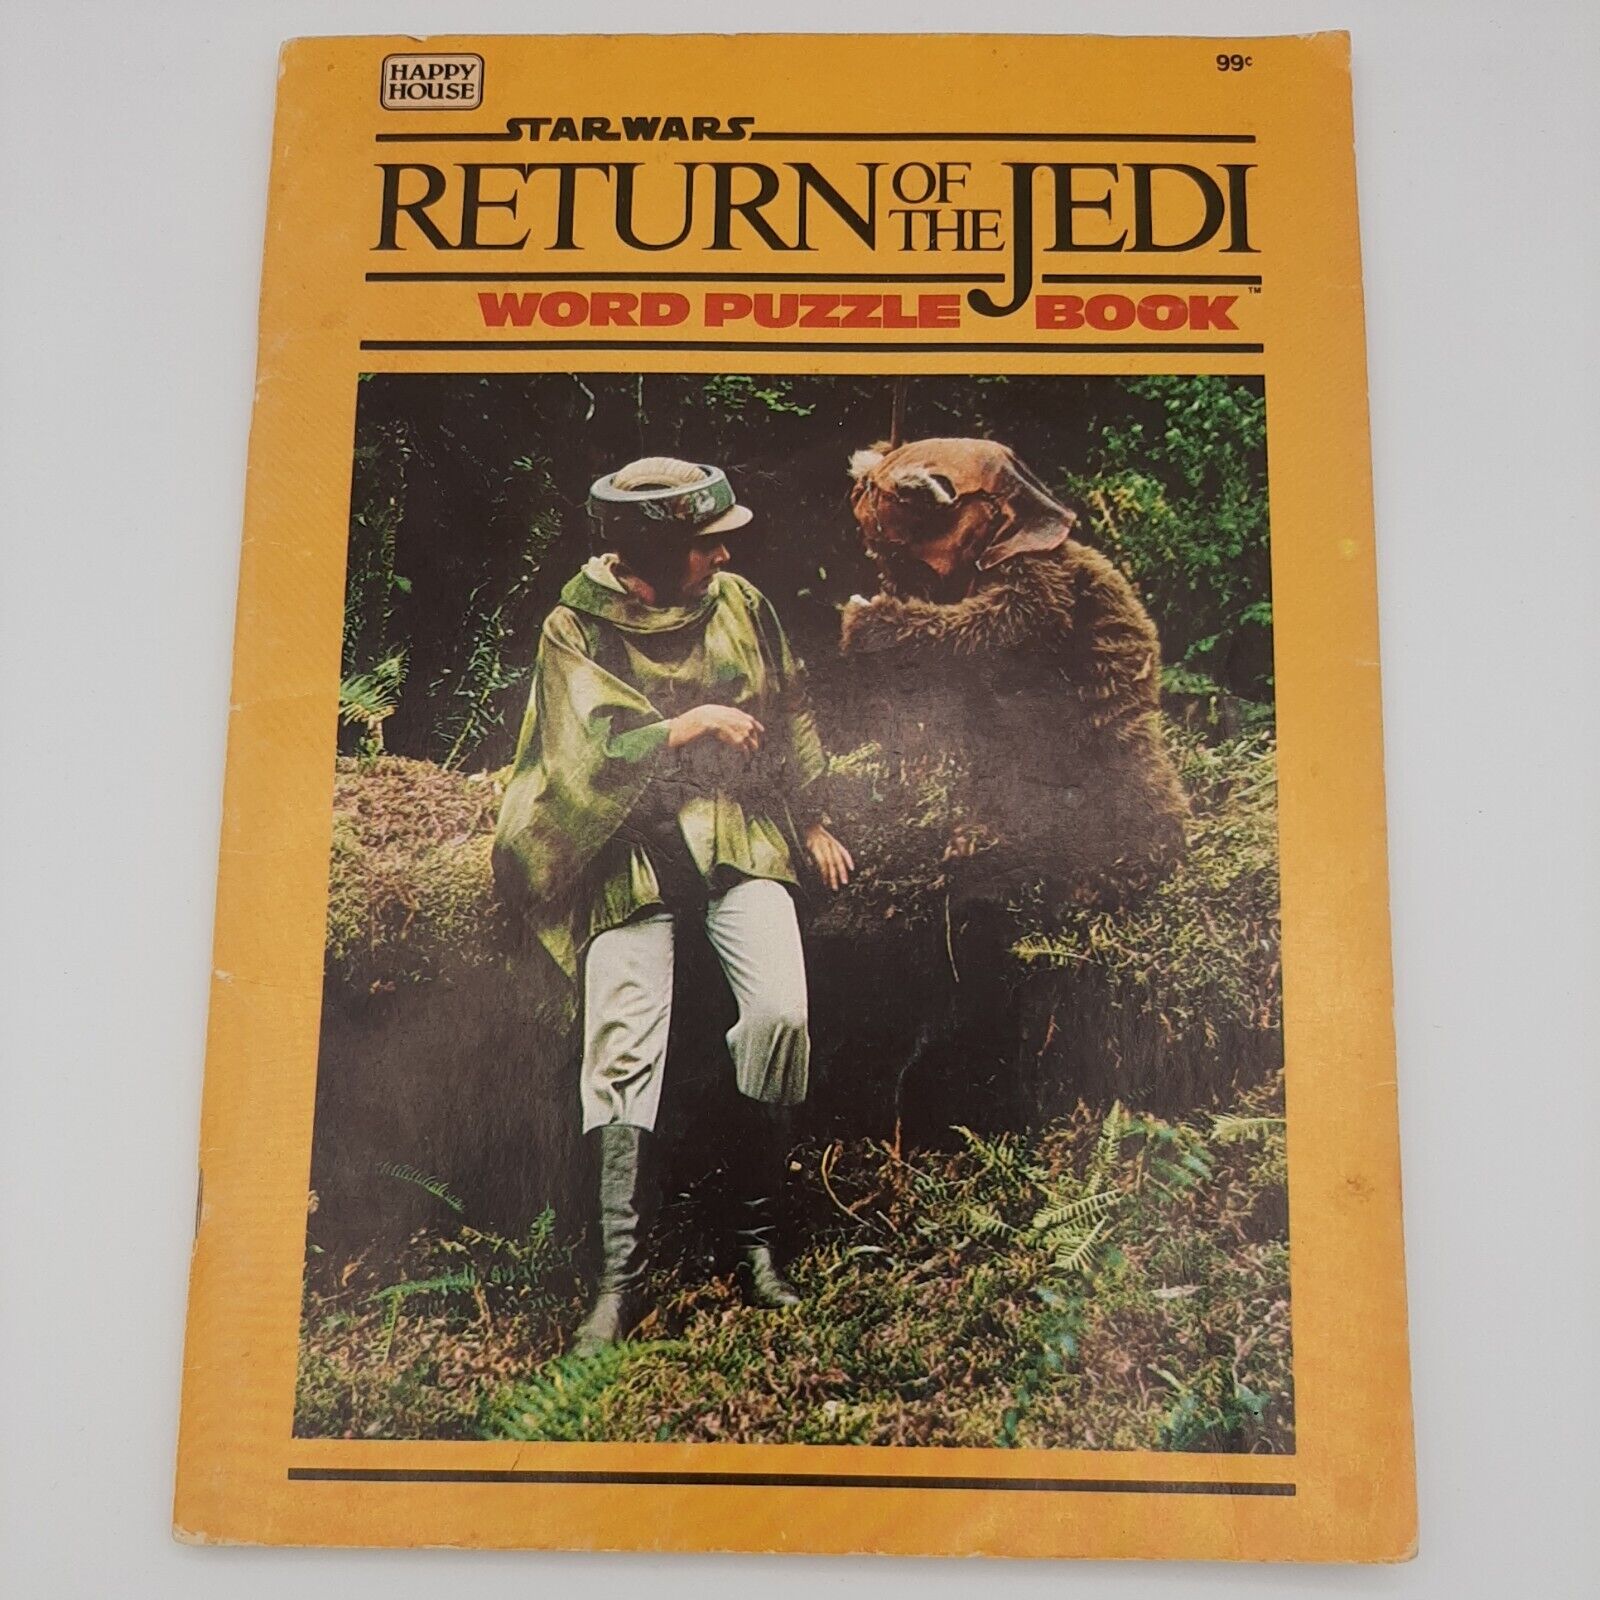 Star Wars Return of the Jedi Picture Word Coloring Book Used Pencil marks. Read